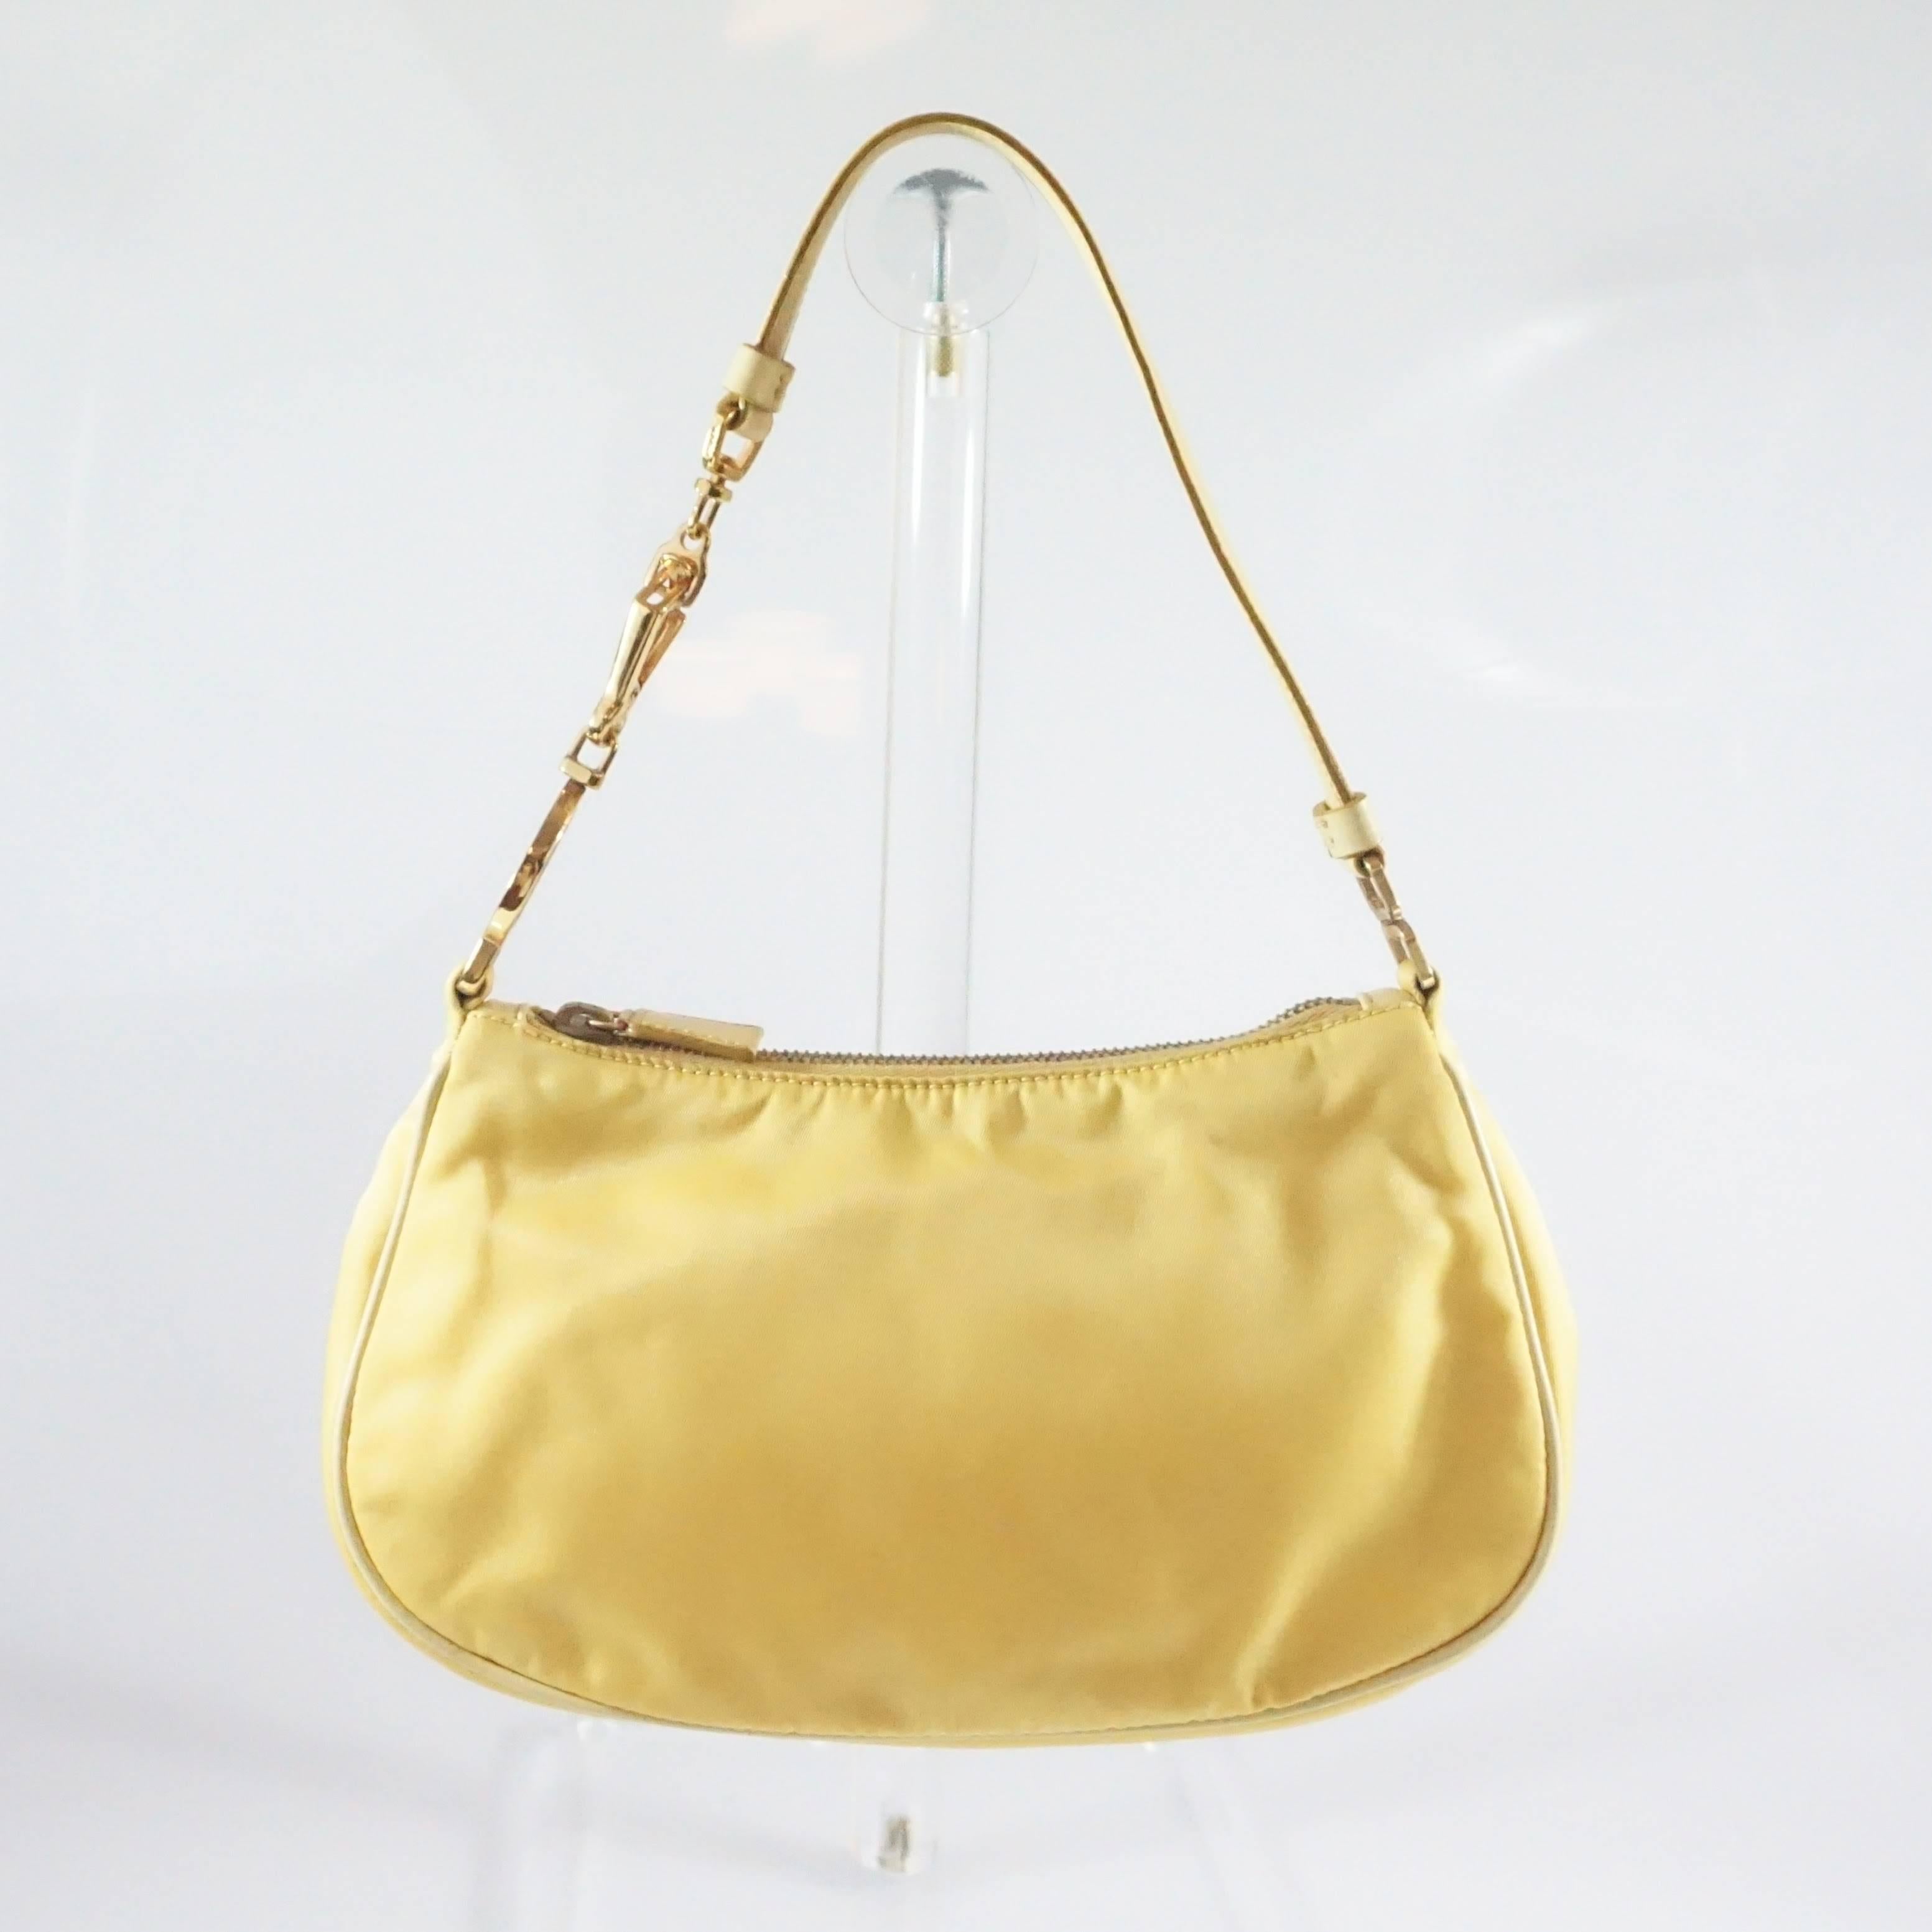 This Prada yellow baguette is made of nylon and has leather accents. The bag features the signature Prada enamel logo and a removable leather strap with gold hardware accents. The bag is in good condition with some hardware tarnishing and wear to